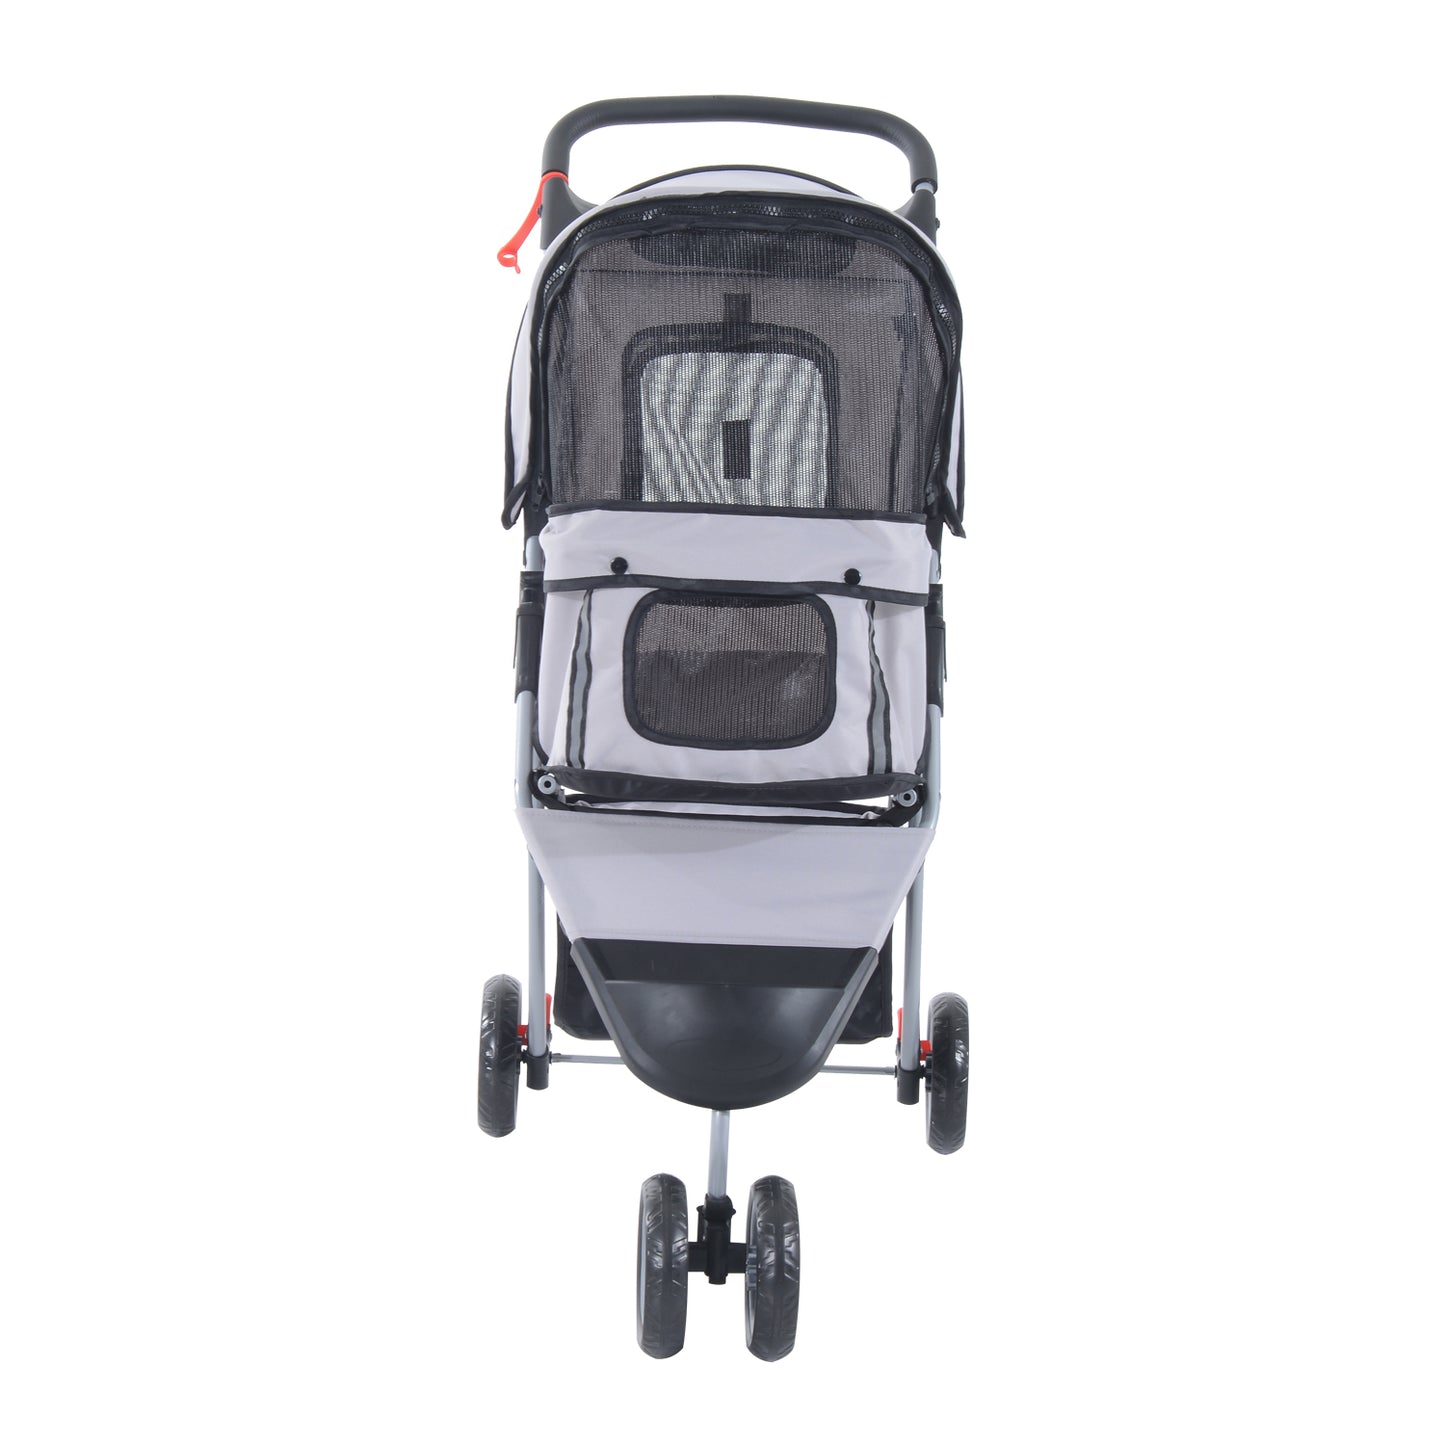 PawHut Dogs Oxford Cloth Three Wheel Pram Grey - Suitable for Small Pets